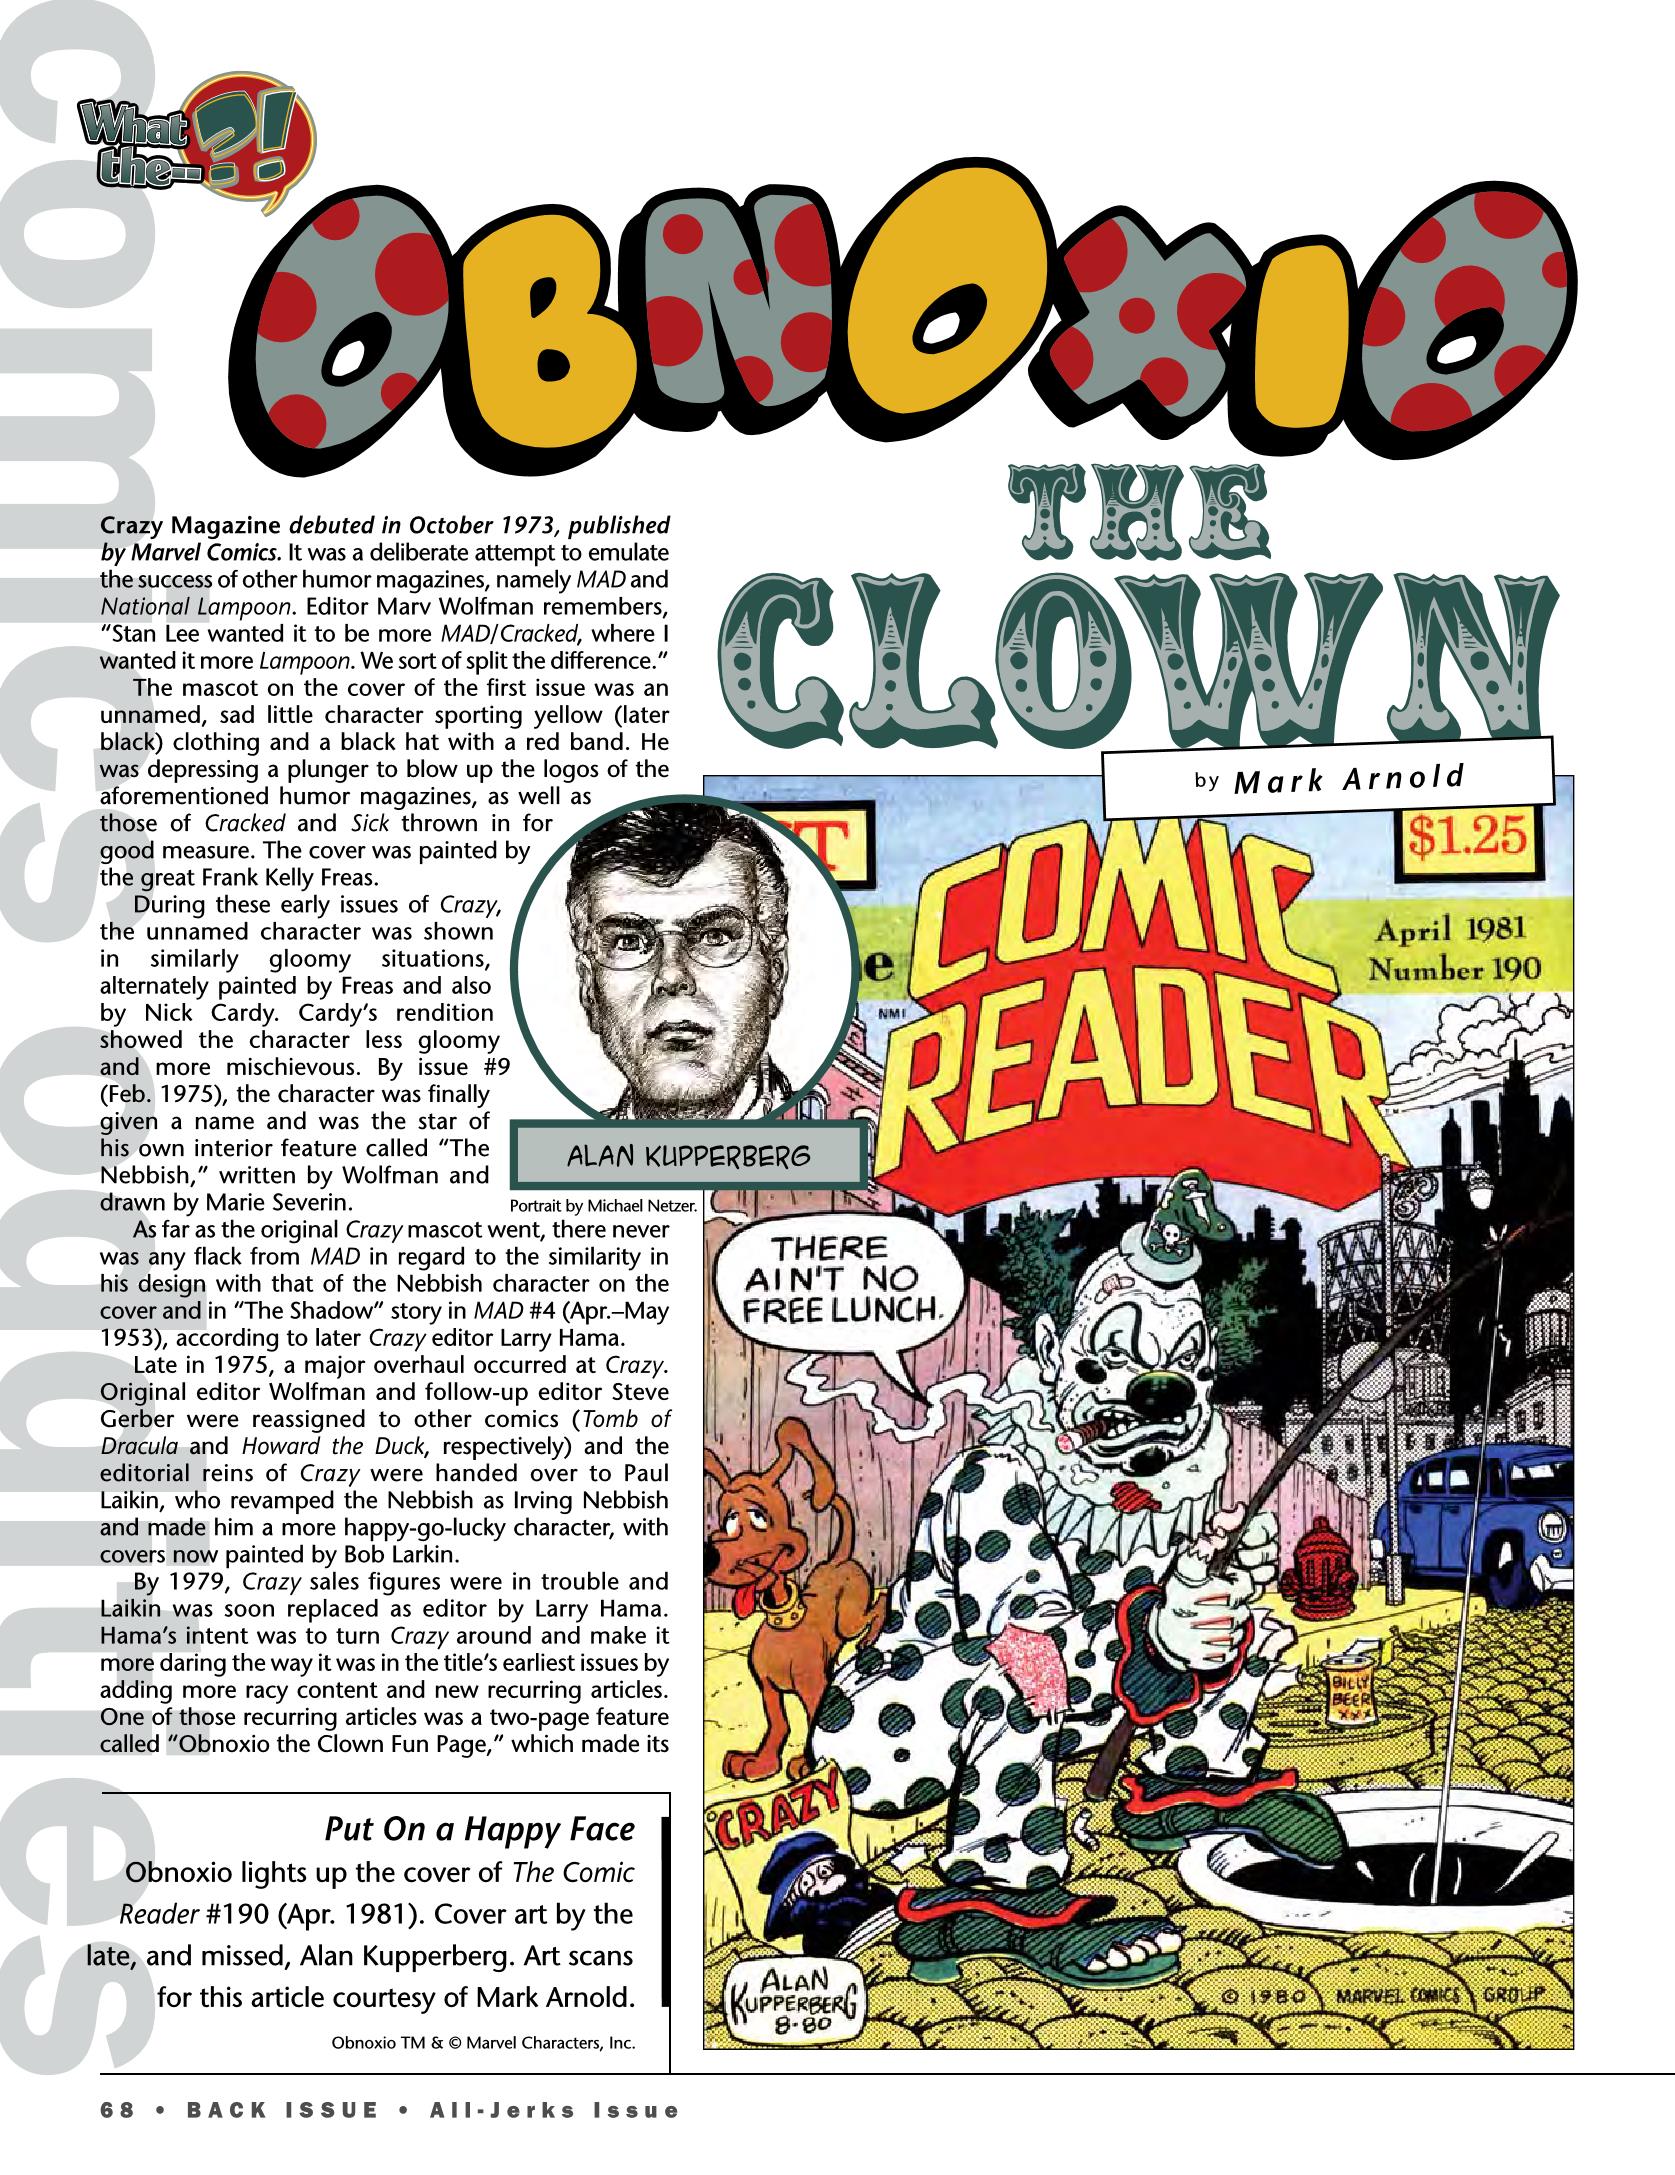 Read online Back Issue comic -  Issue #91 - 68